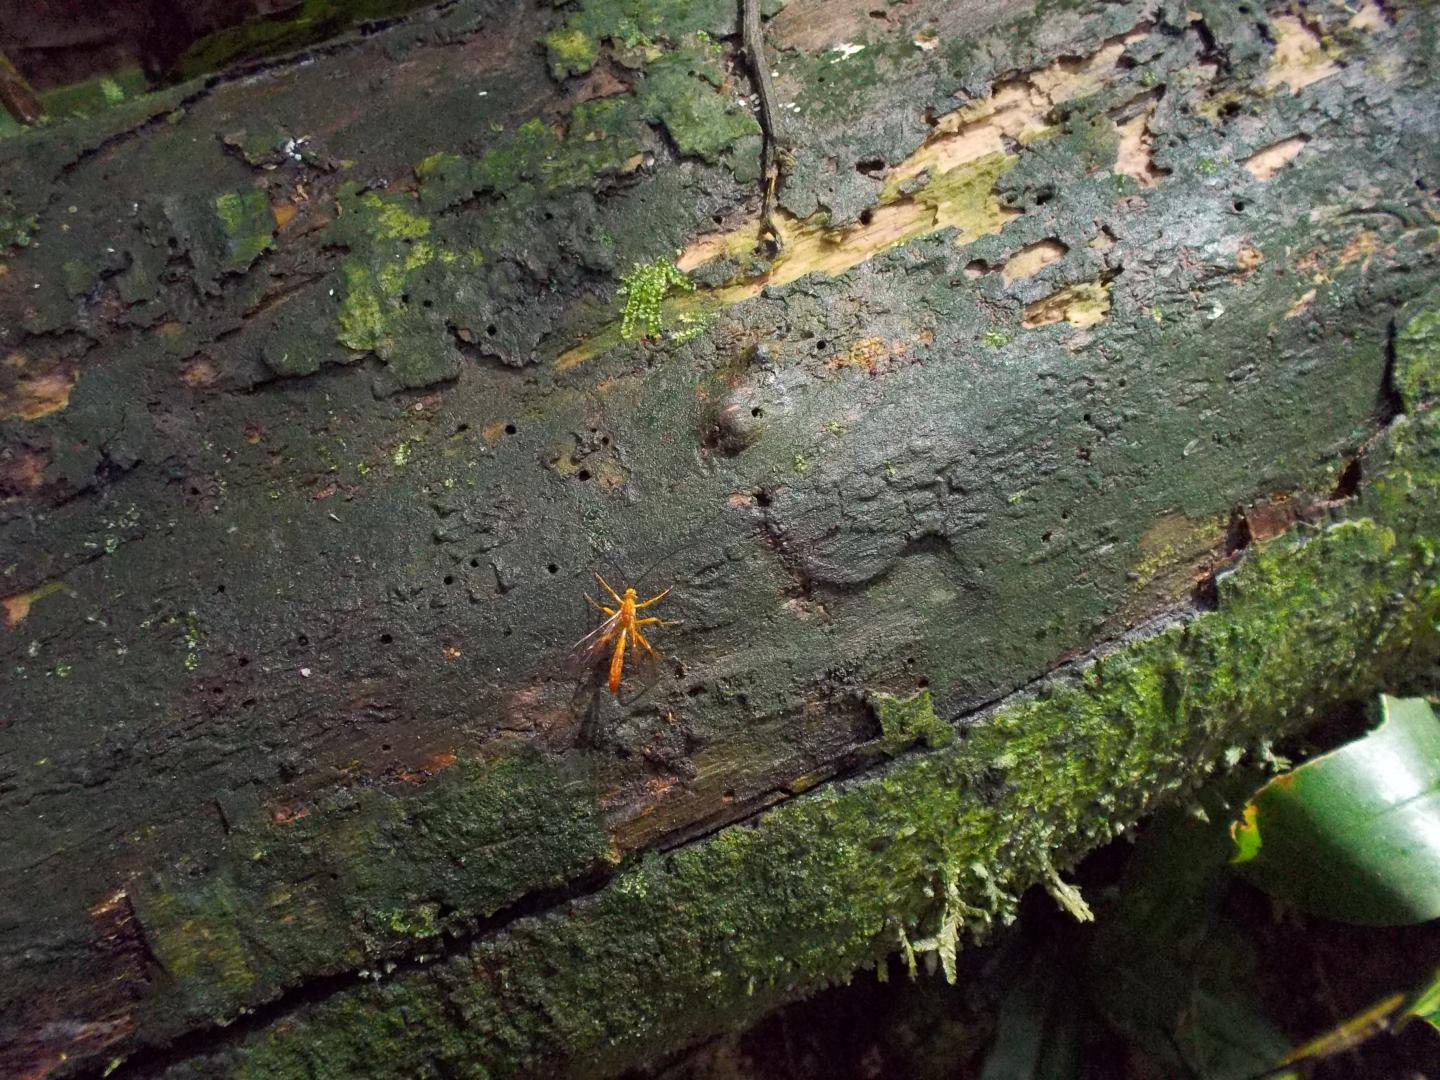 Parasitoid Wasps Prefer the Decaying Wood of Primary Forest